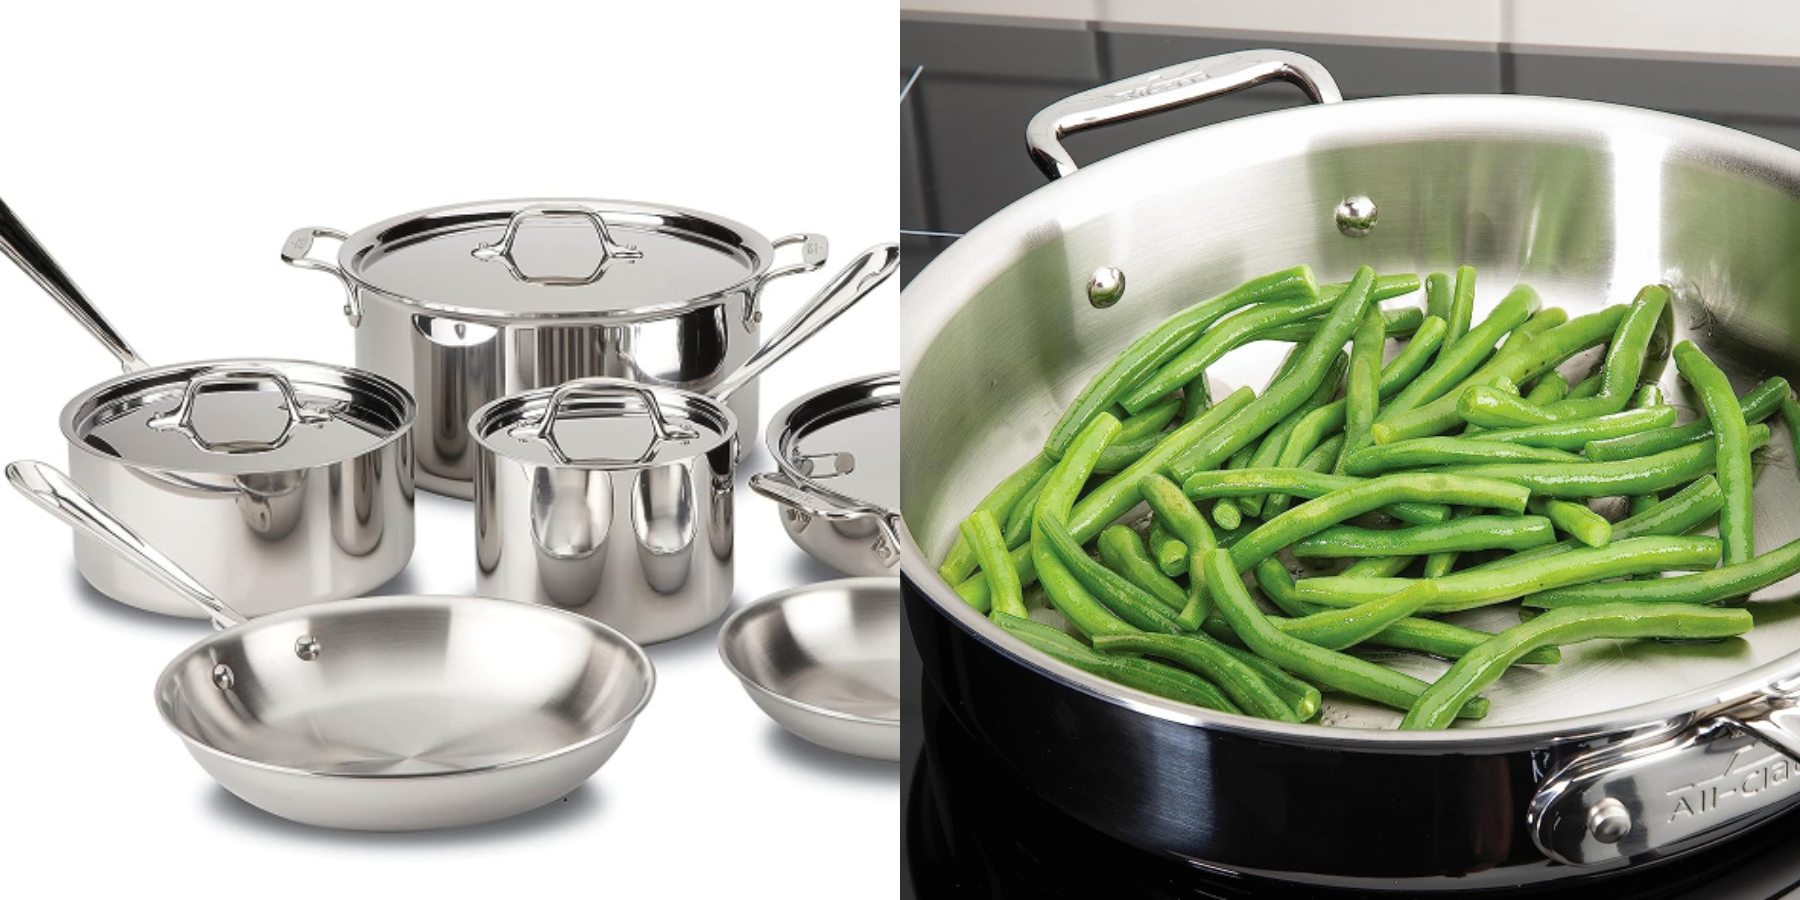 Score All-Clad Cookware Up to 41% Off During 's October Prime Day